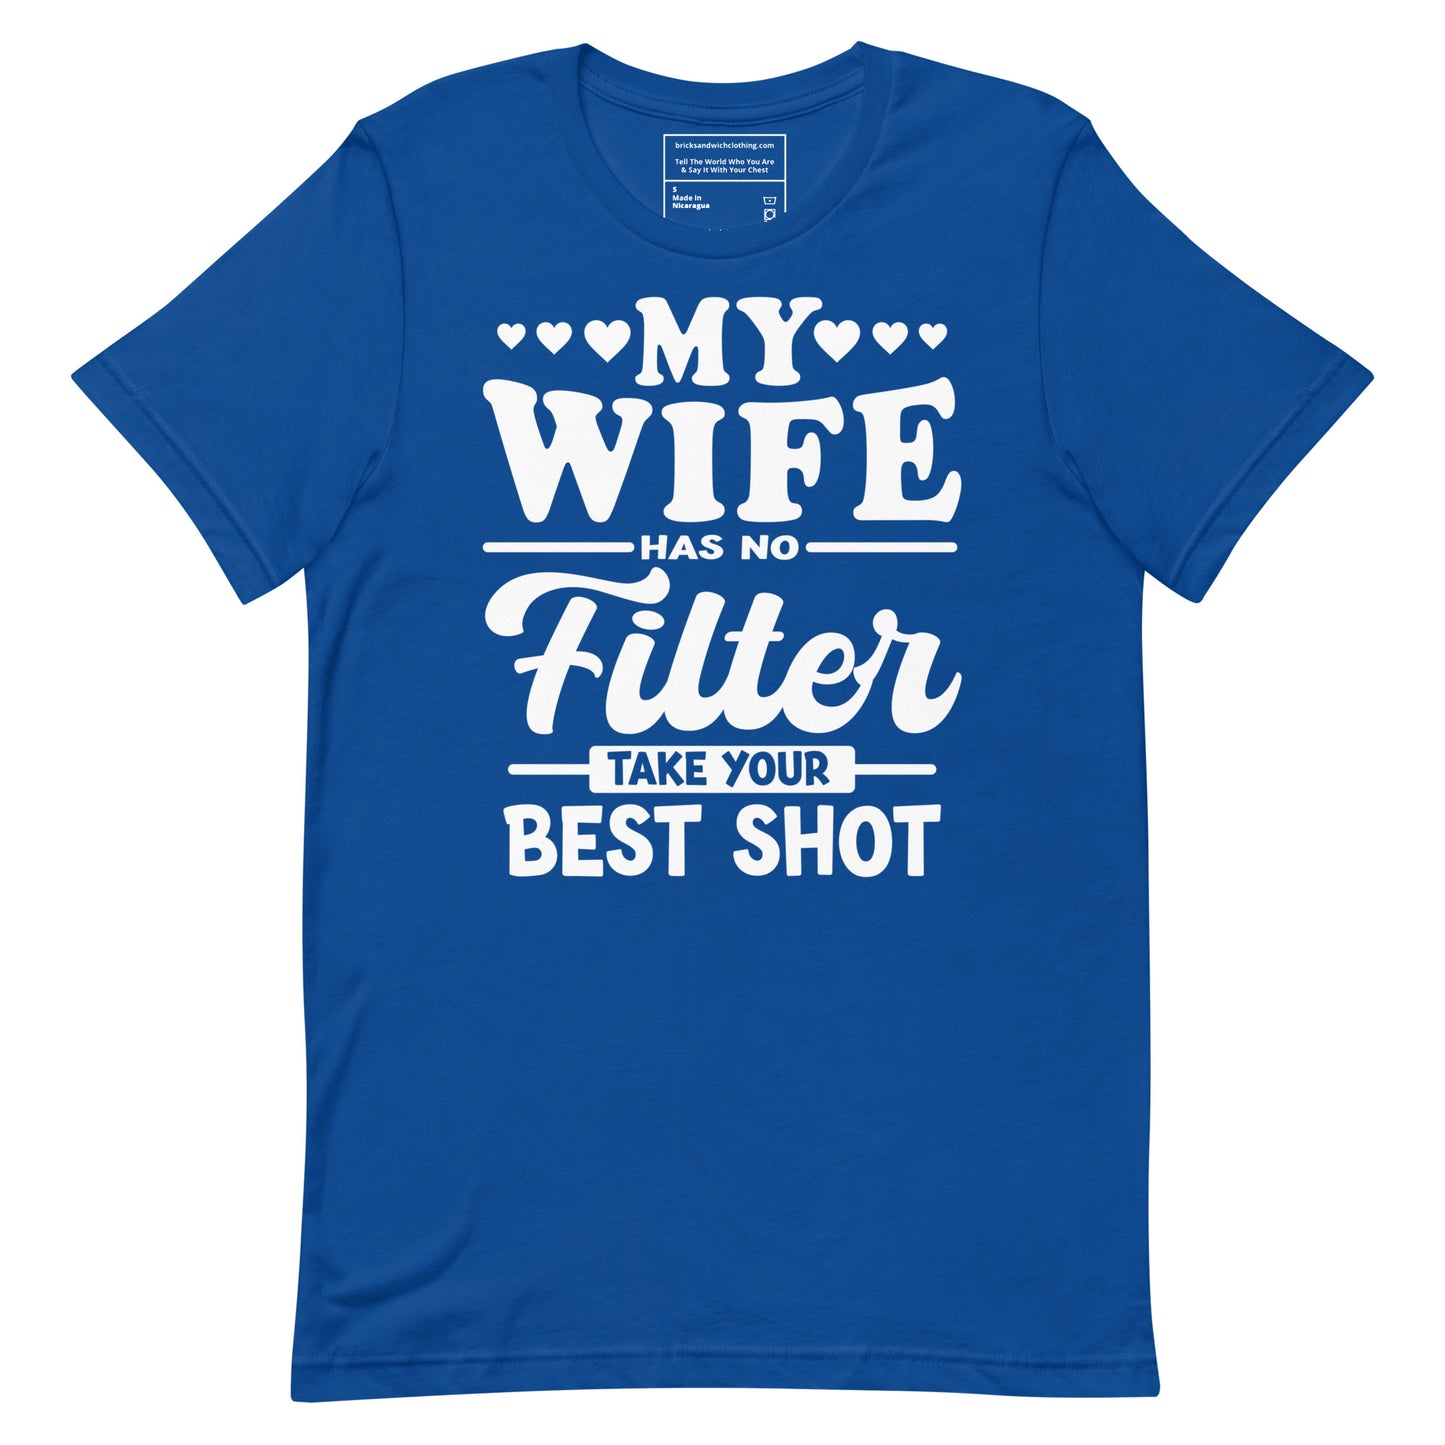 My Wife Has No Filter T-shirt White Ink